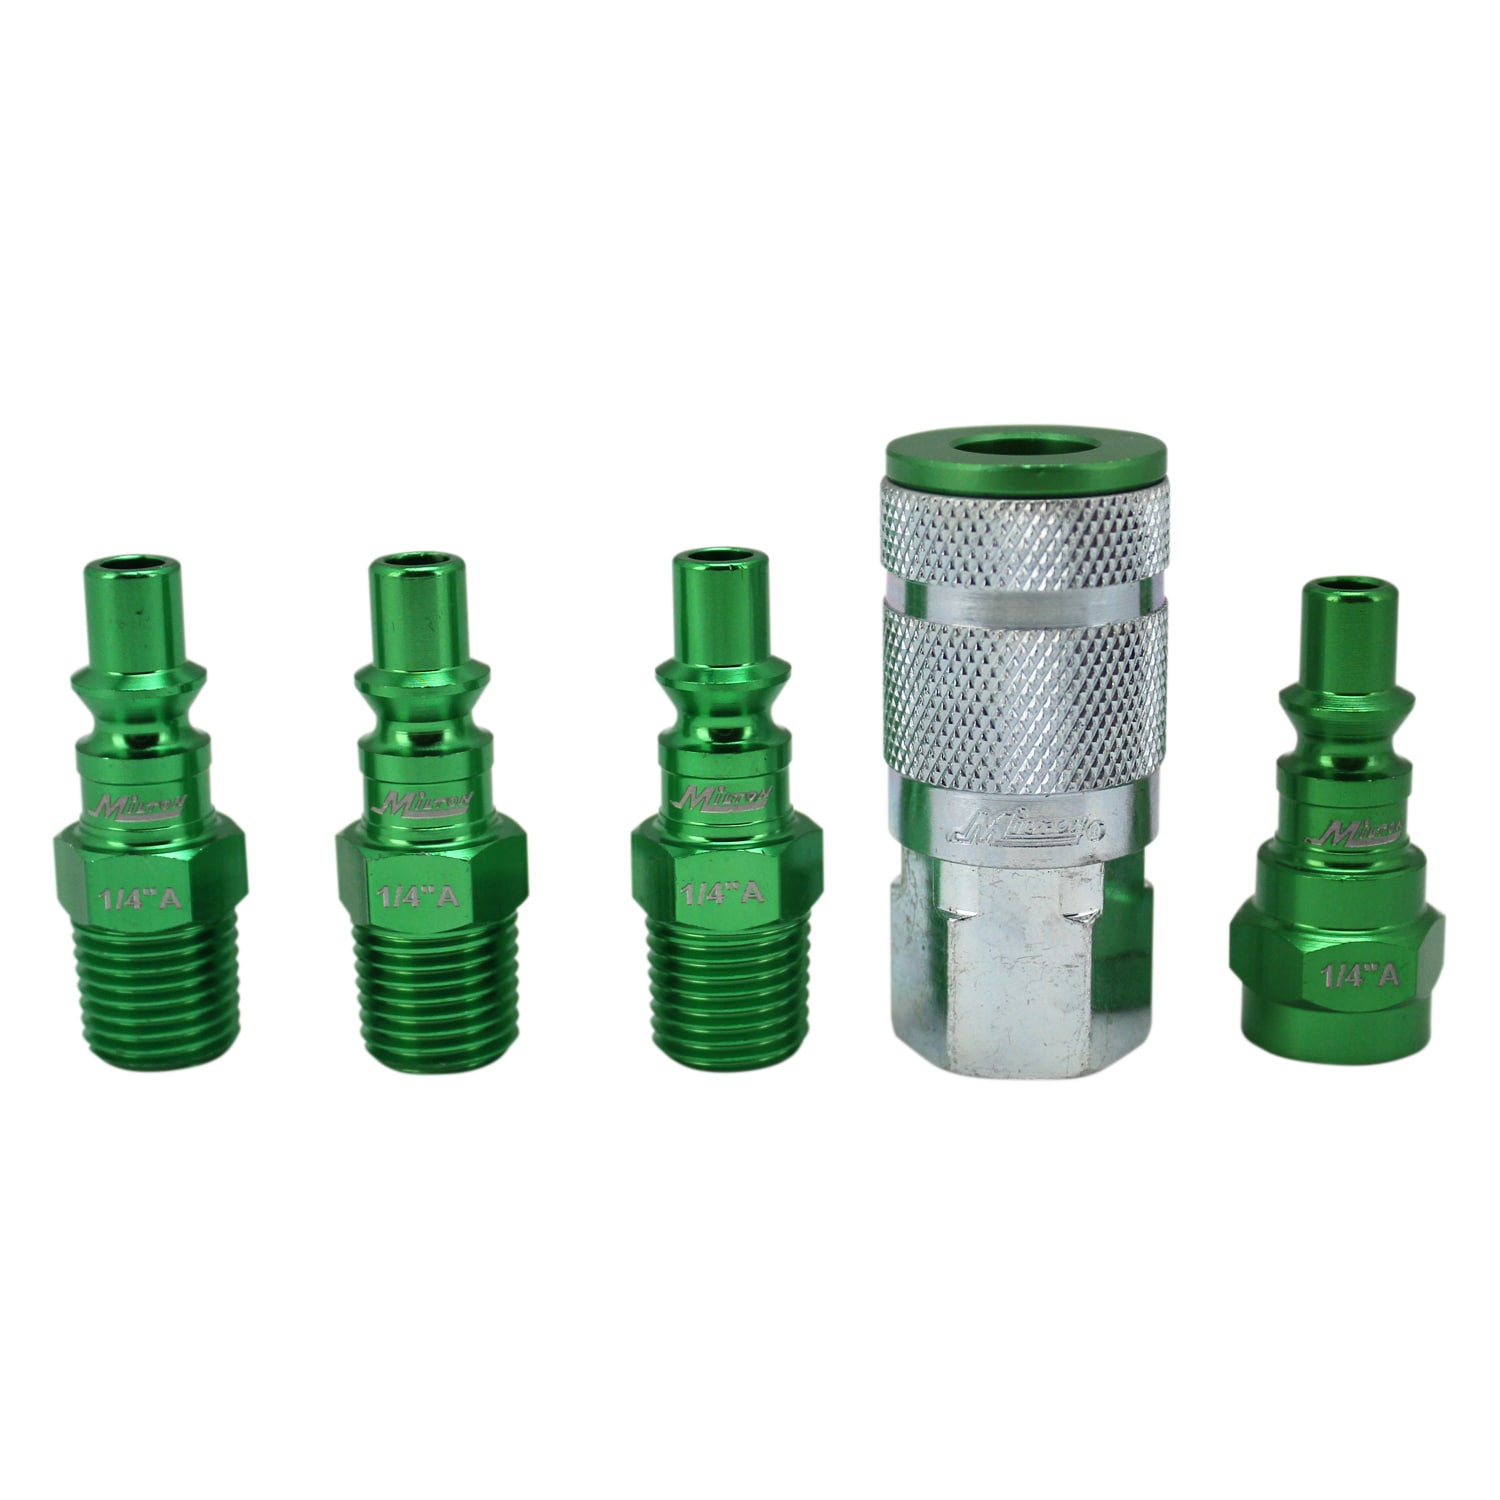 M Style 8 pcs Heavy Duty Quick Coupler Air Hose Connector Fittings 1/4 NPT I 